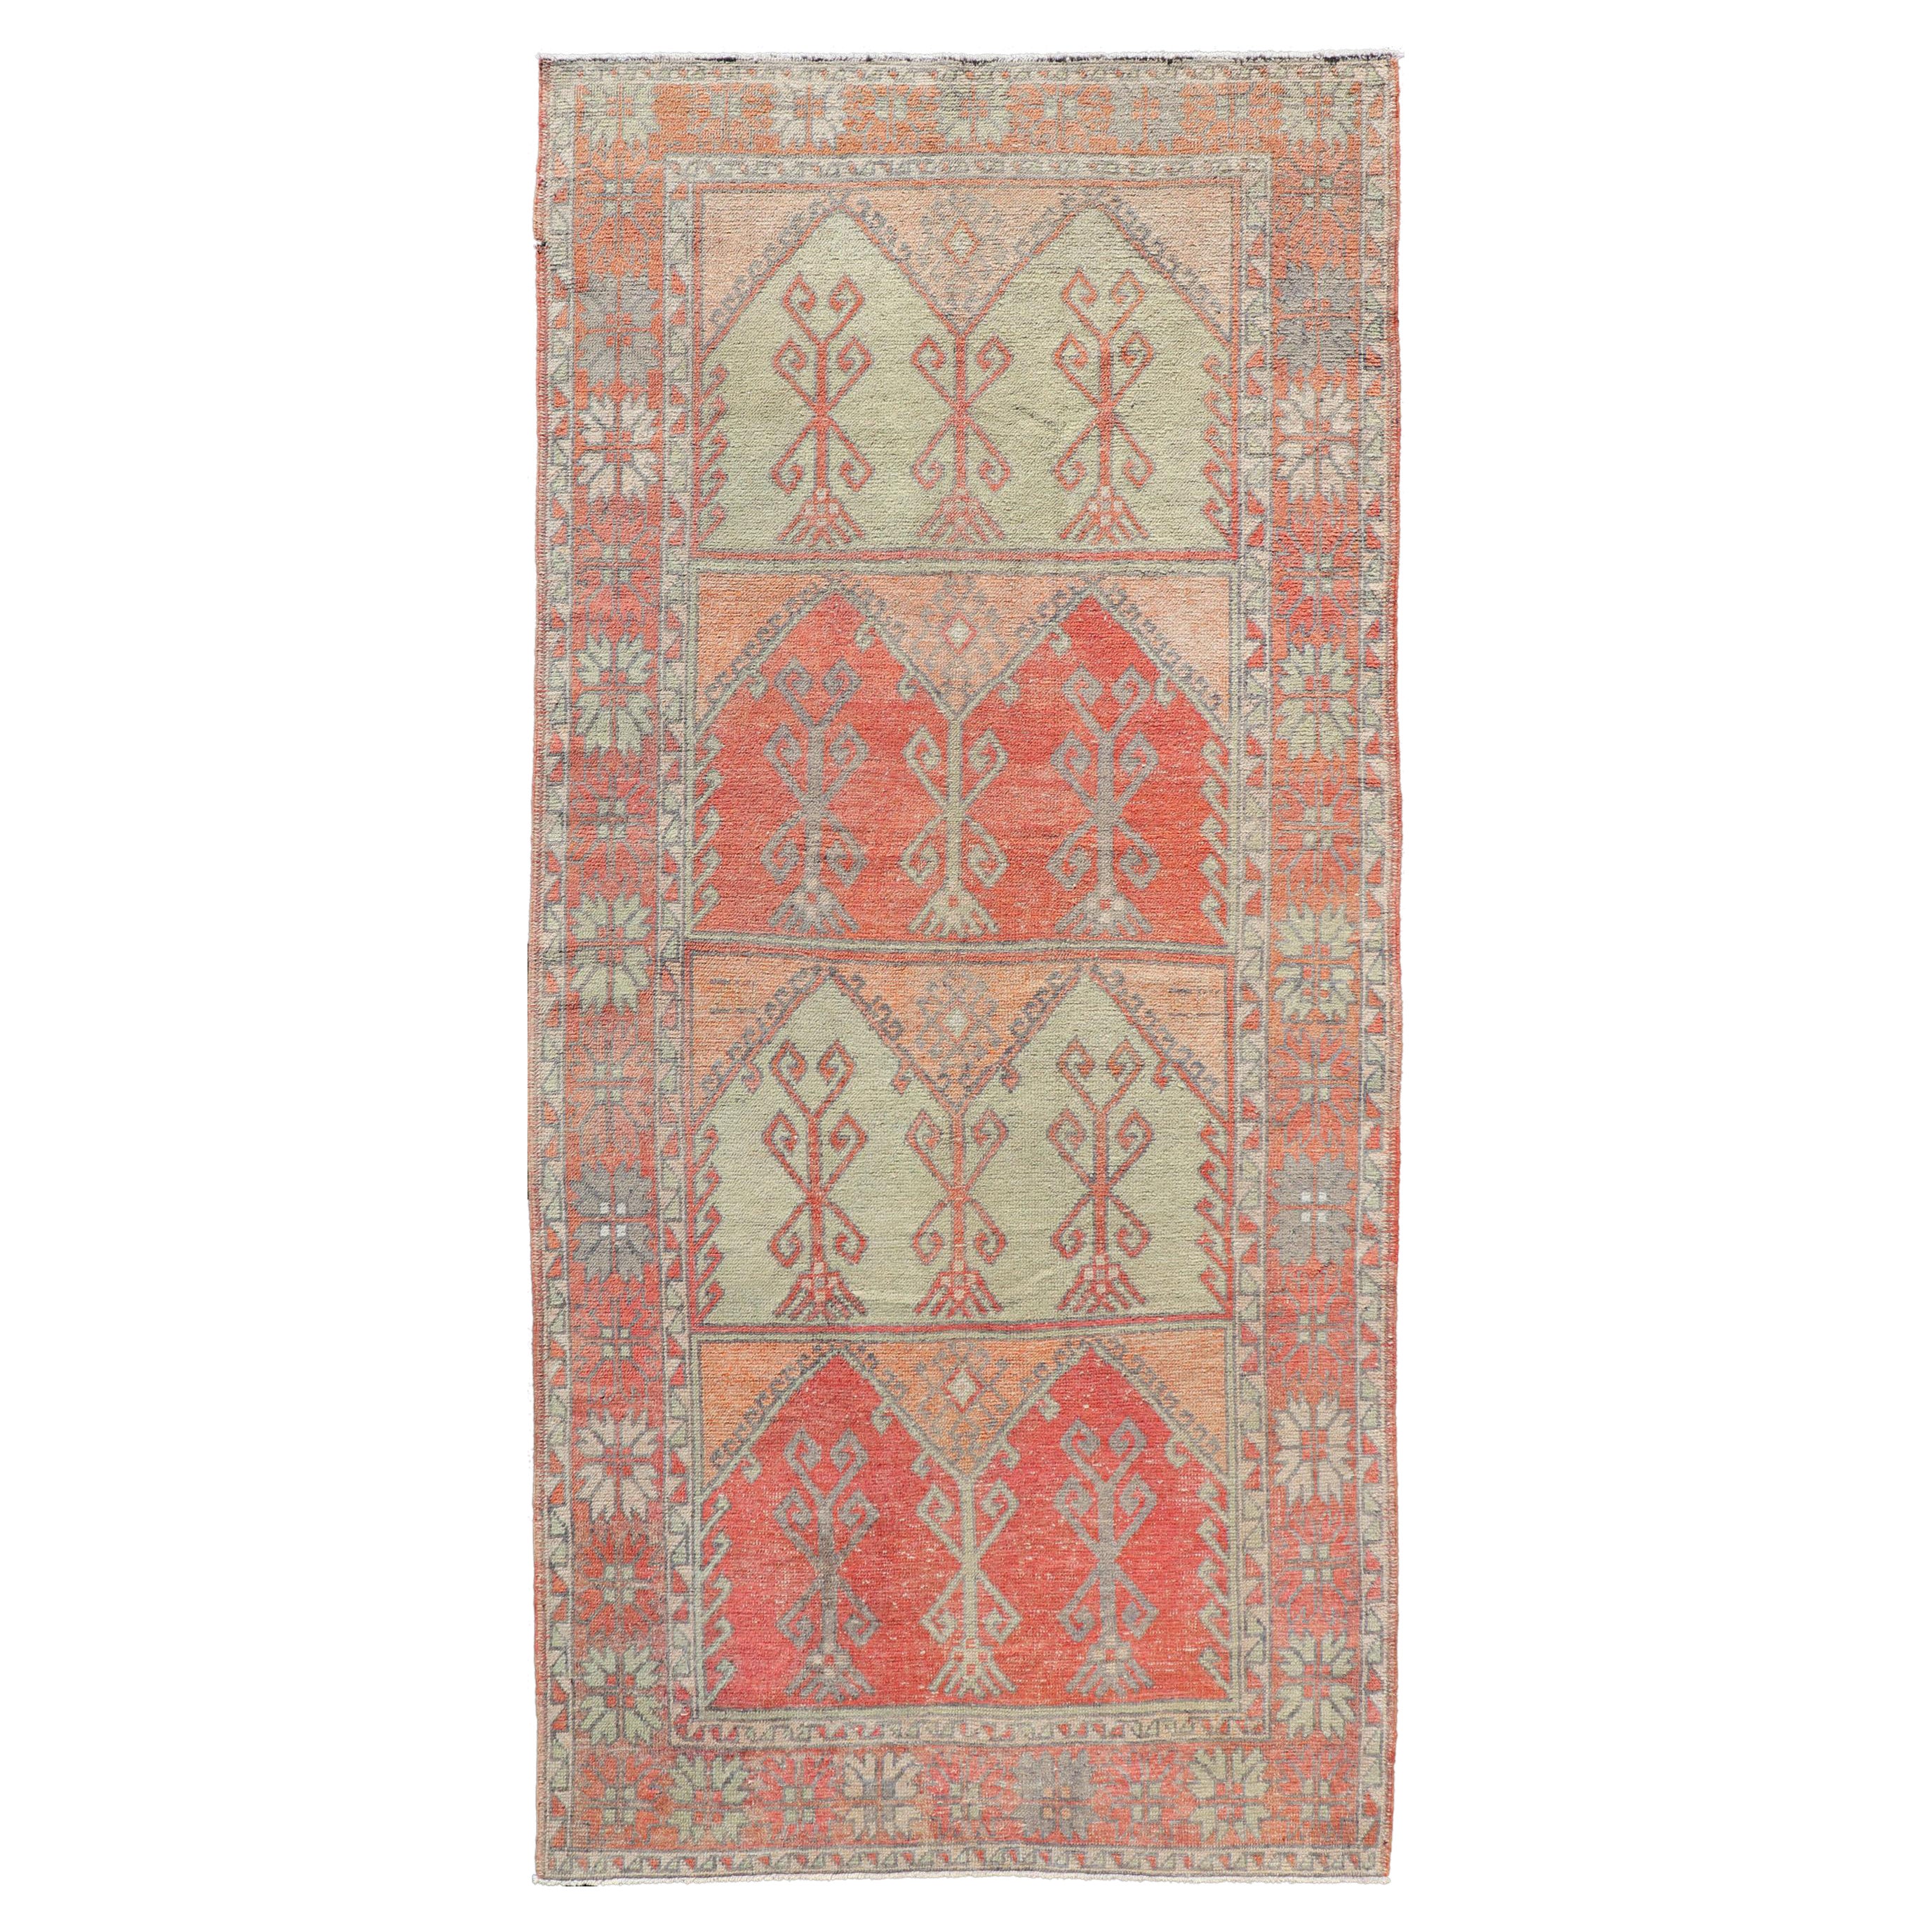 Gallery Rug, Vintage Turkish in Faded Red, Coral, Orange, Soft Pink and Green For Sale